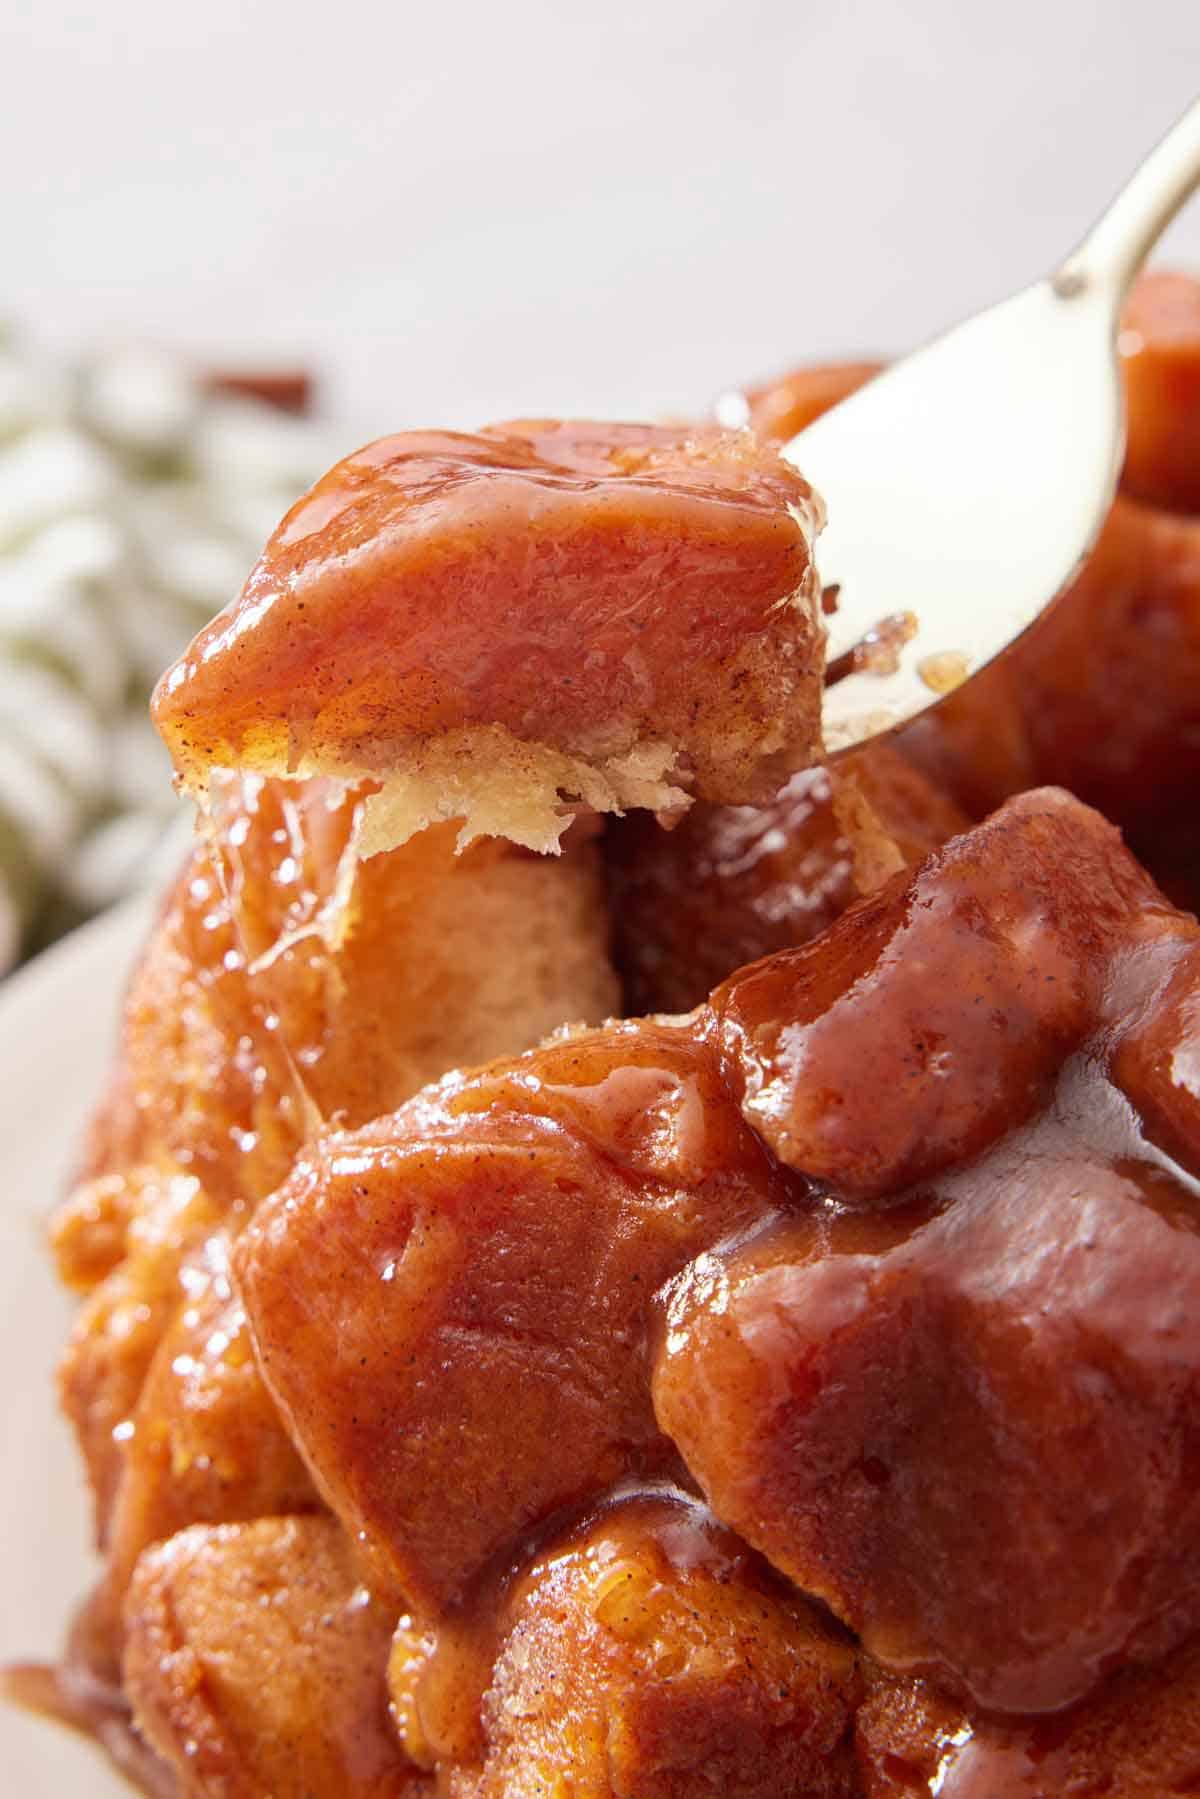 A fork lifting up a piece of monkey bread.